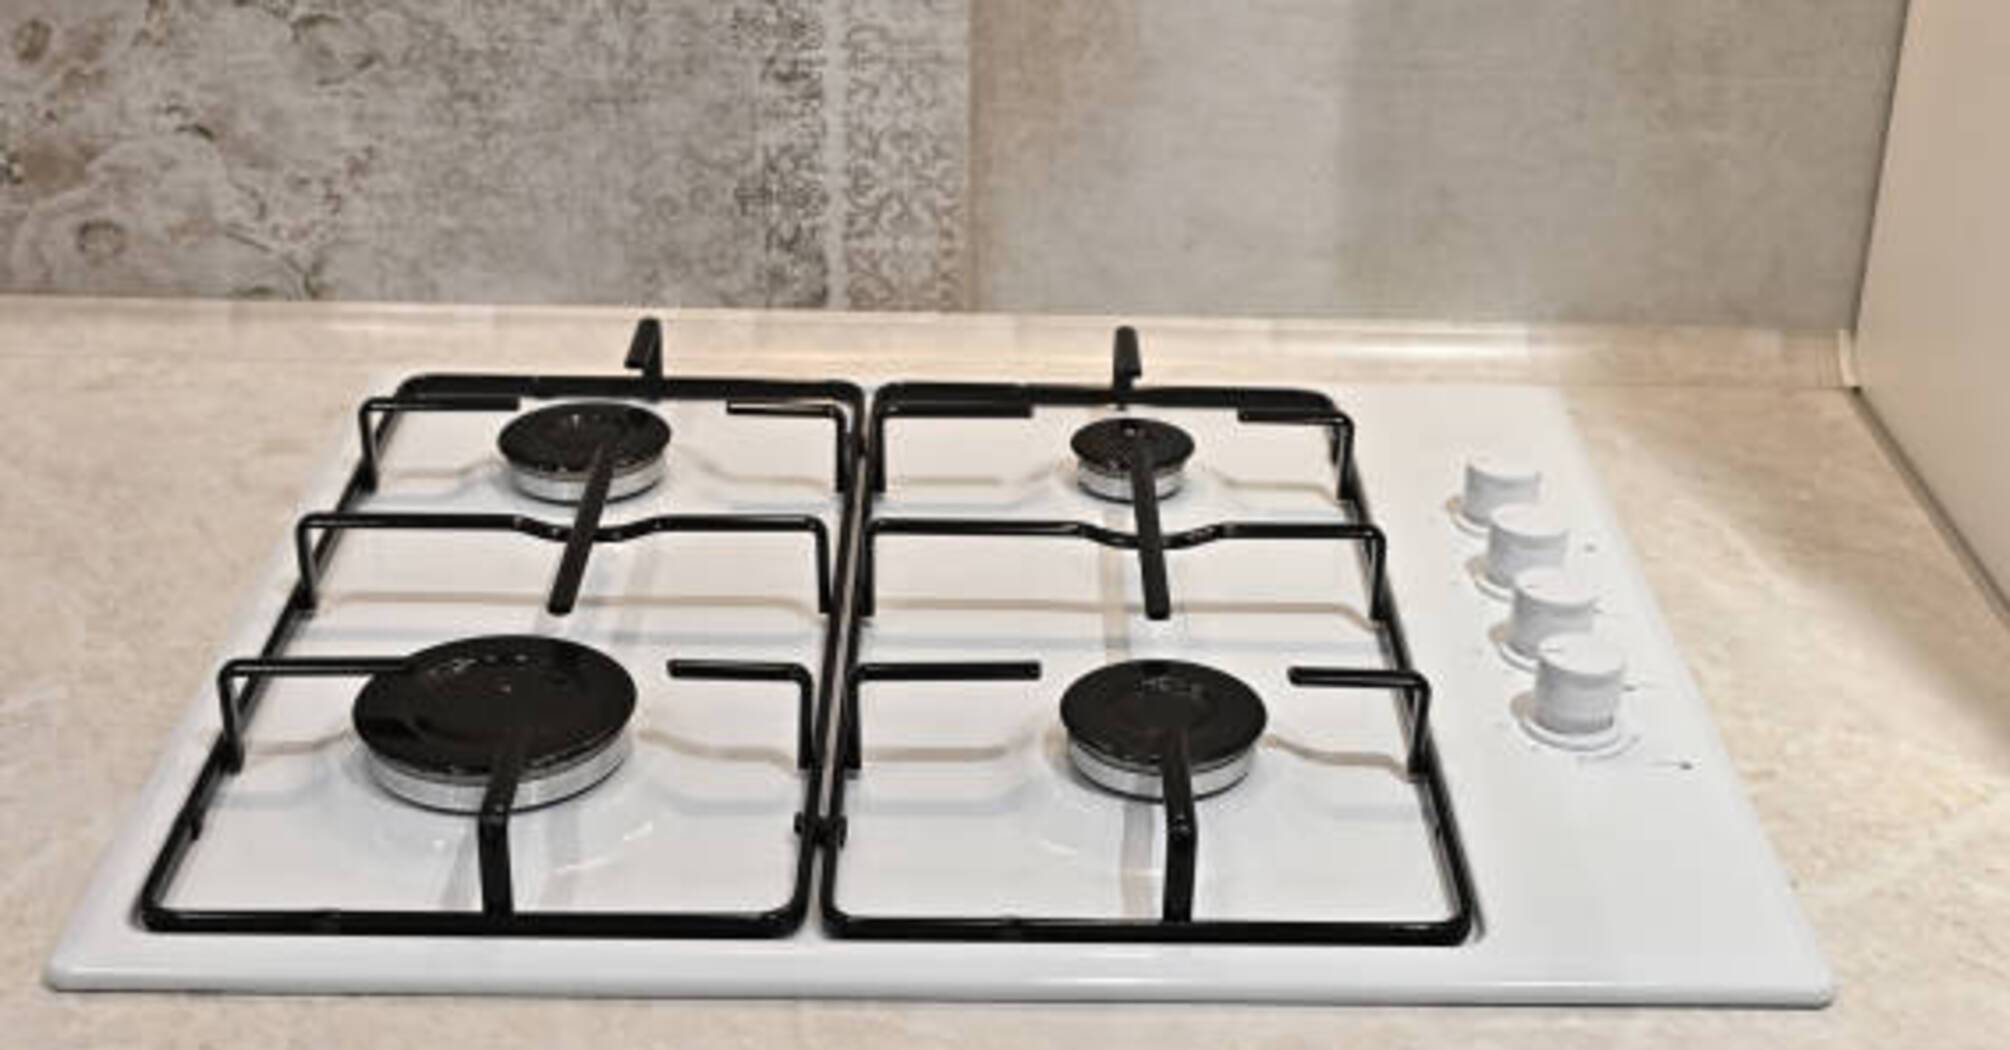 How to remove stubborn grease and soot from the gas stove grate: 5 effective tips